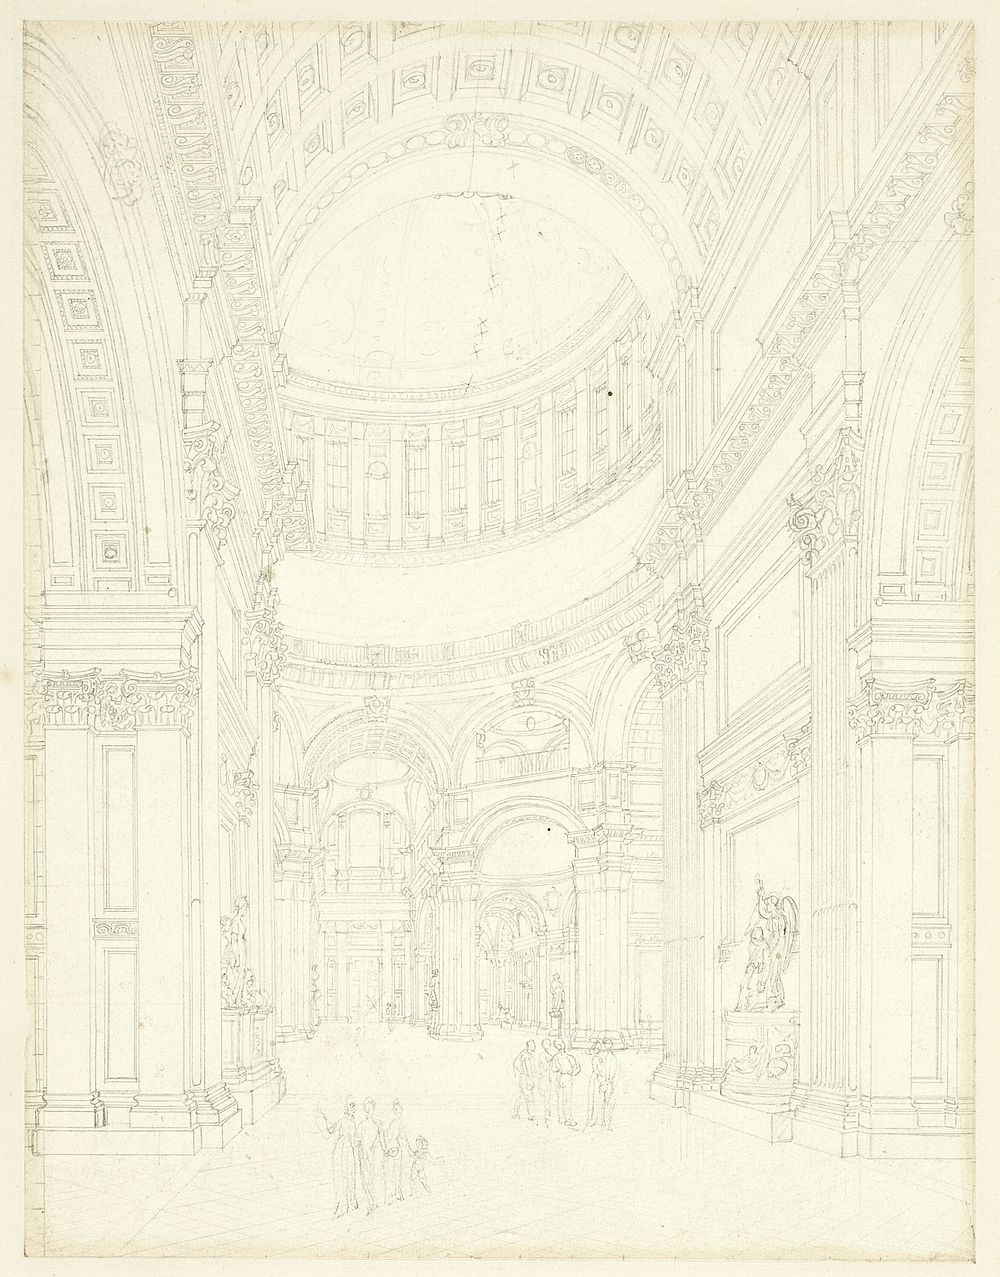 Study for St. Paul's Cathedral, from Microcosm of London by Augustus Charles Pugin